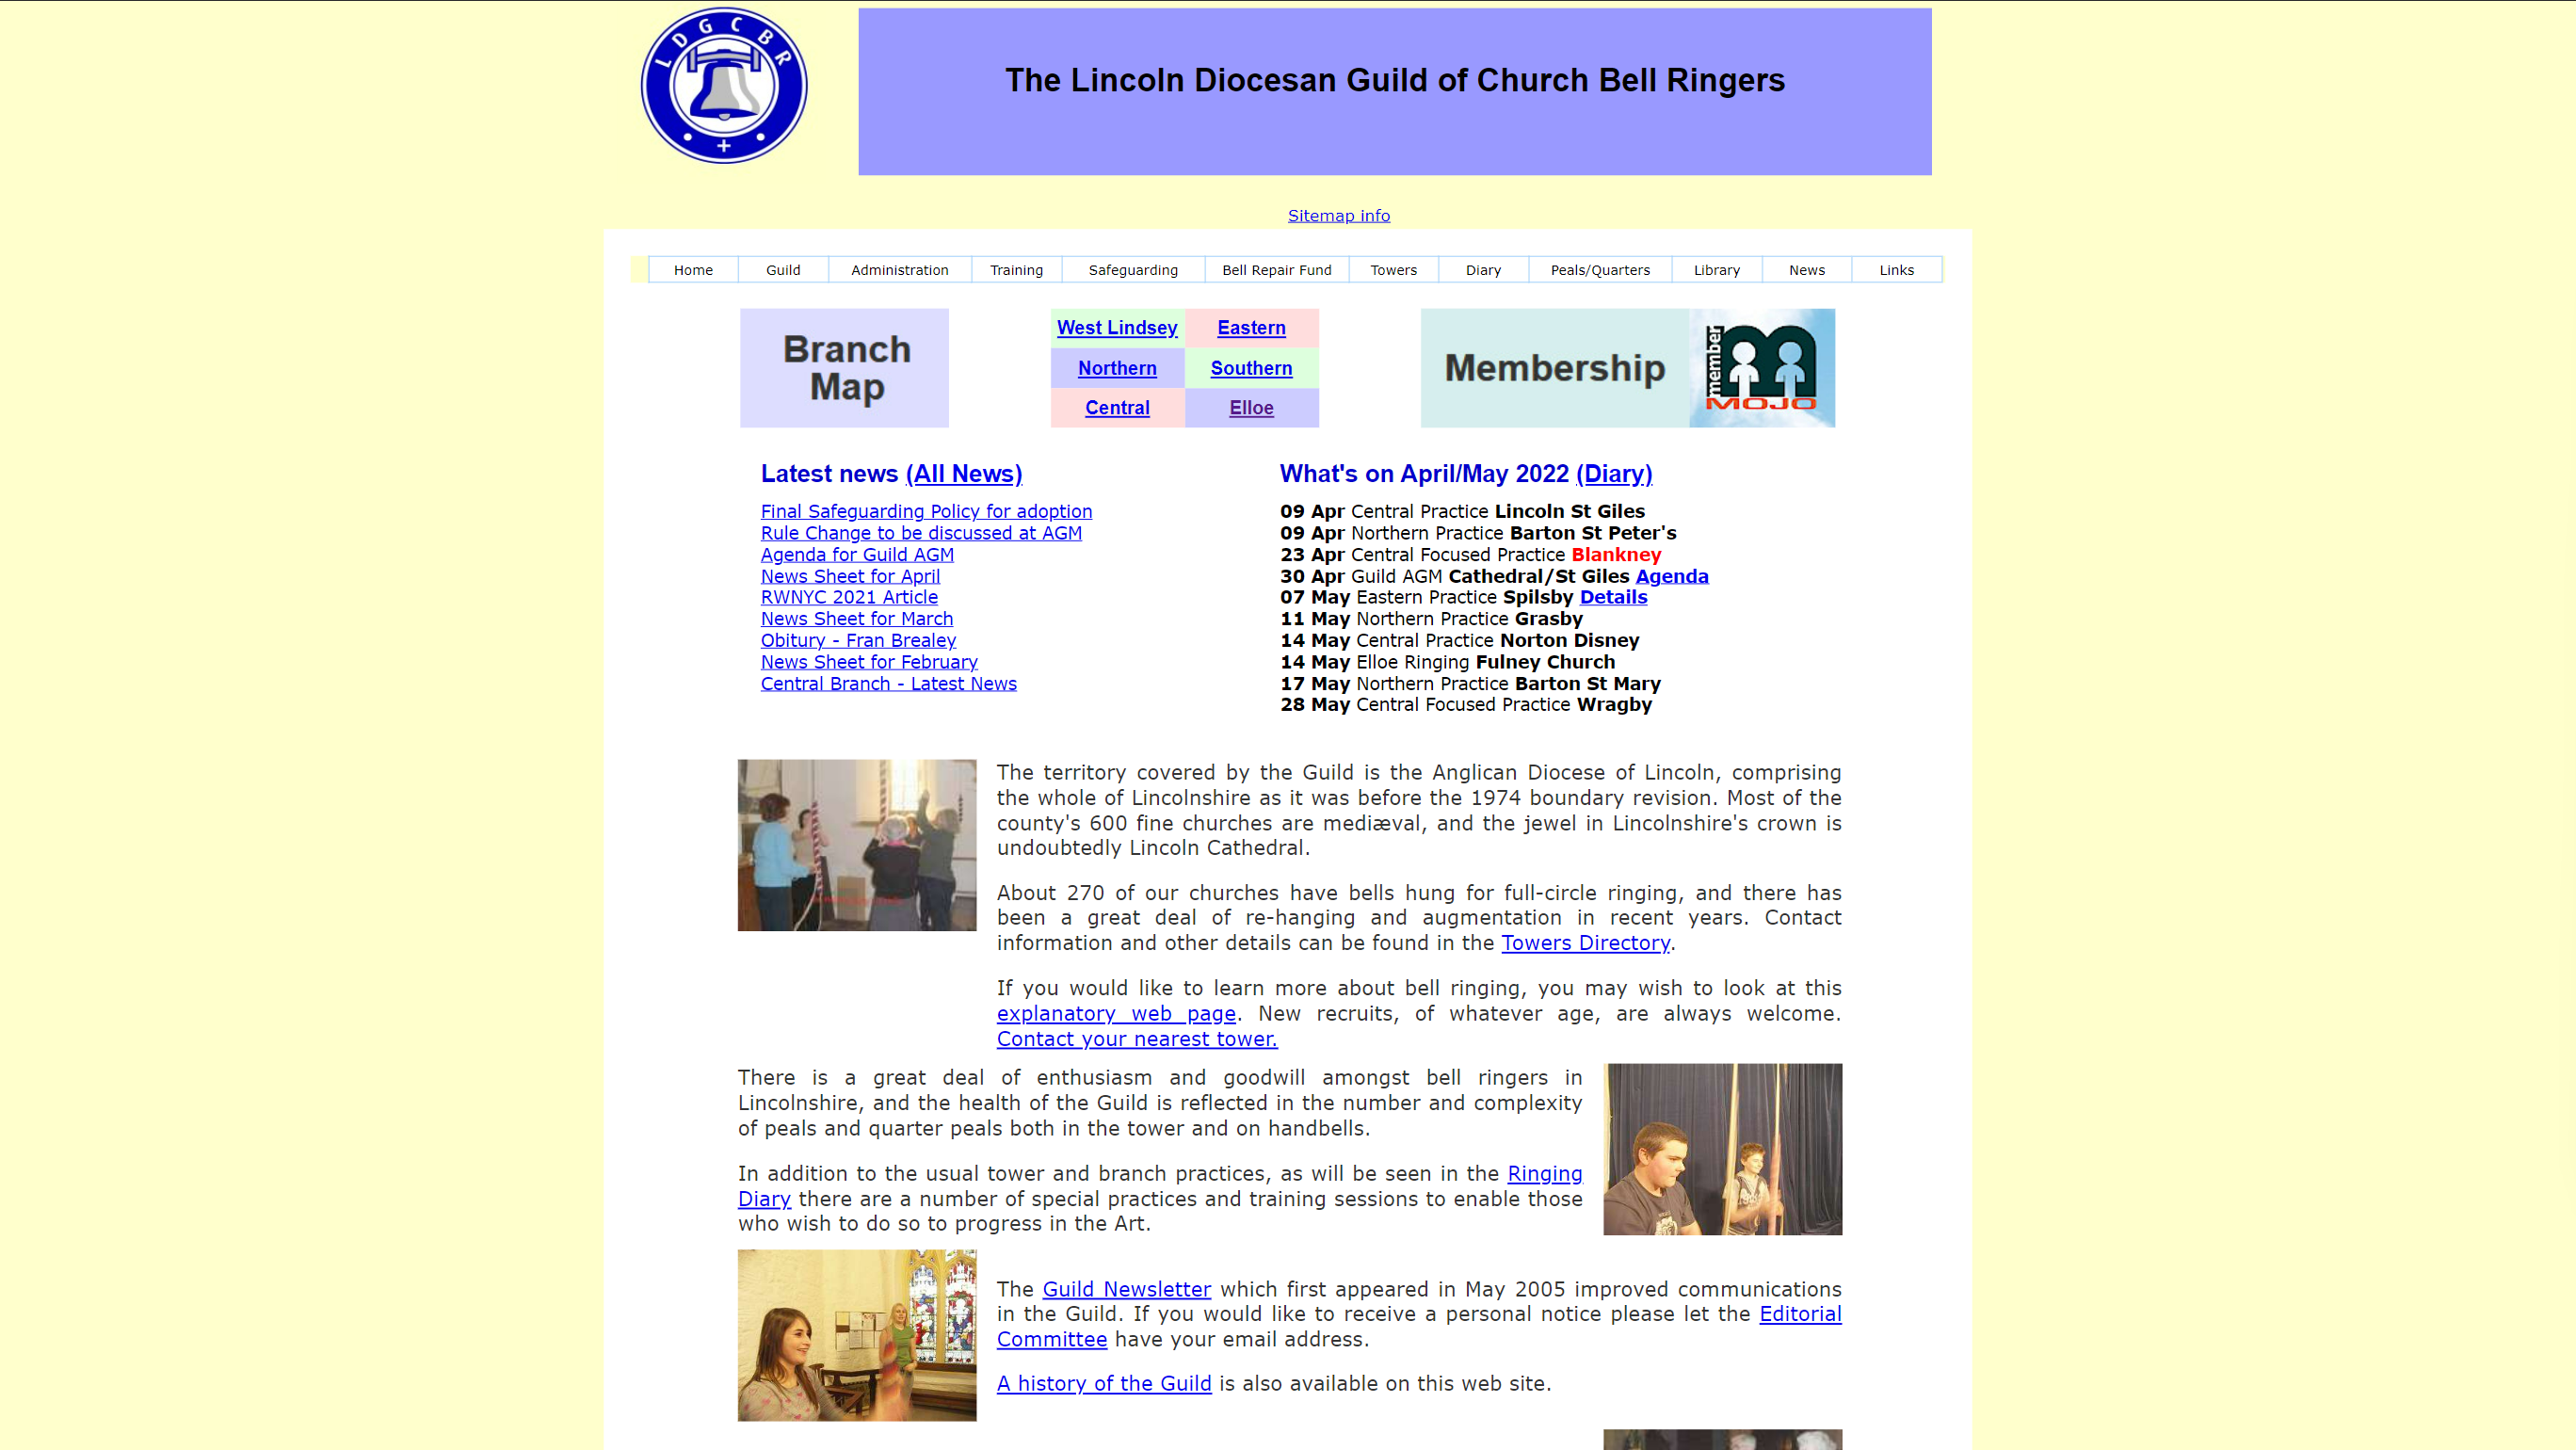 The Lincoln Diocesan Guild of Church Bell Ringers